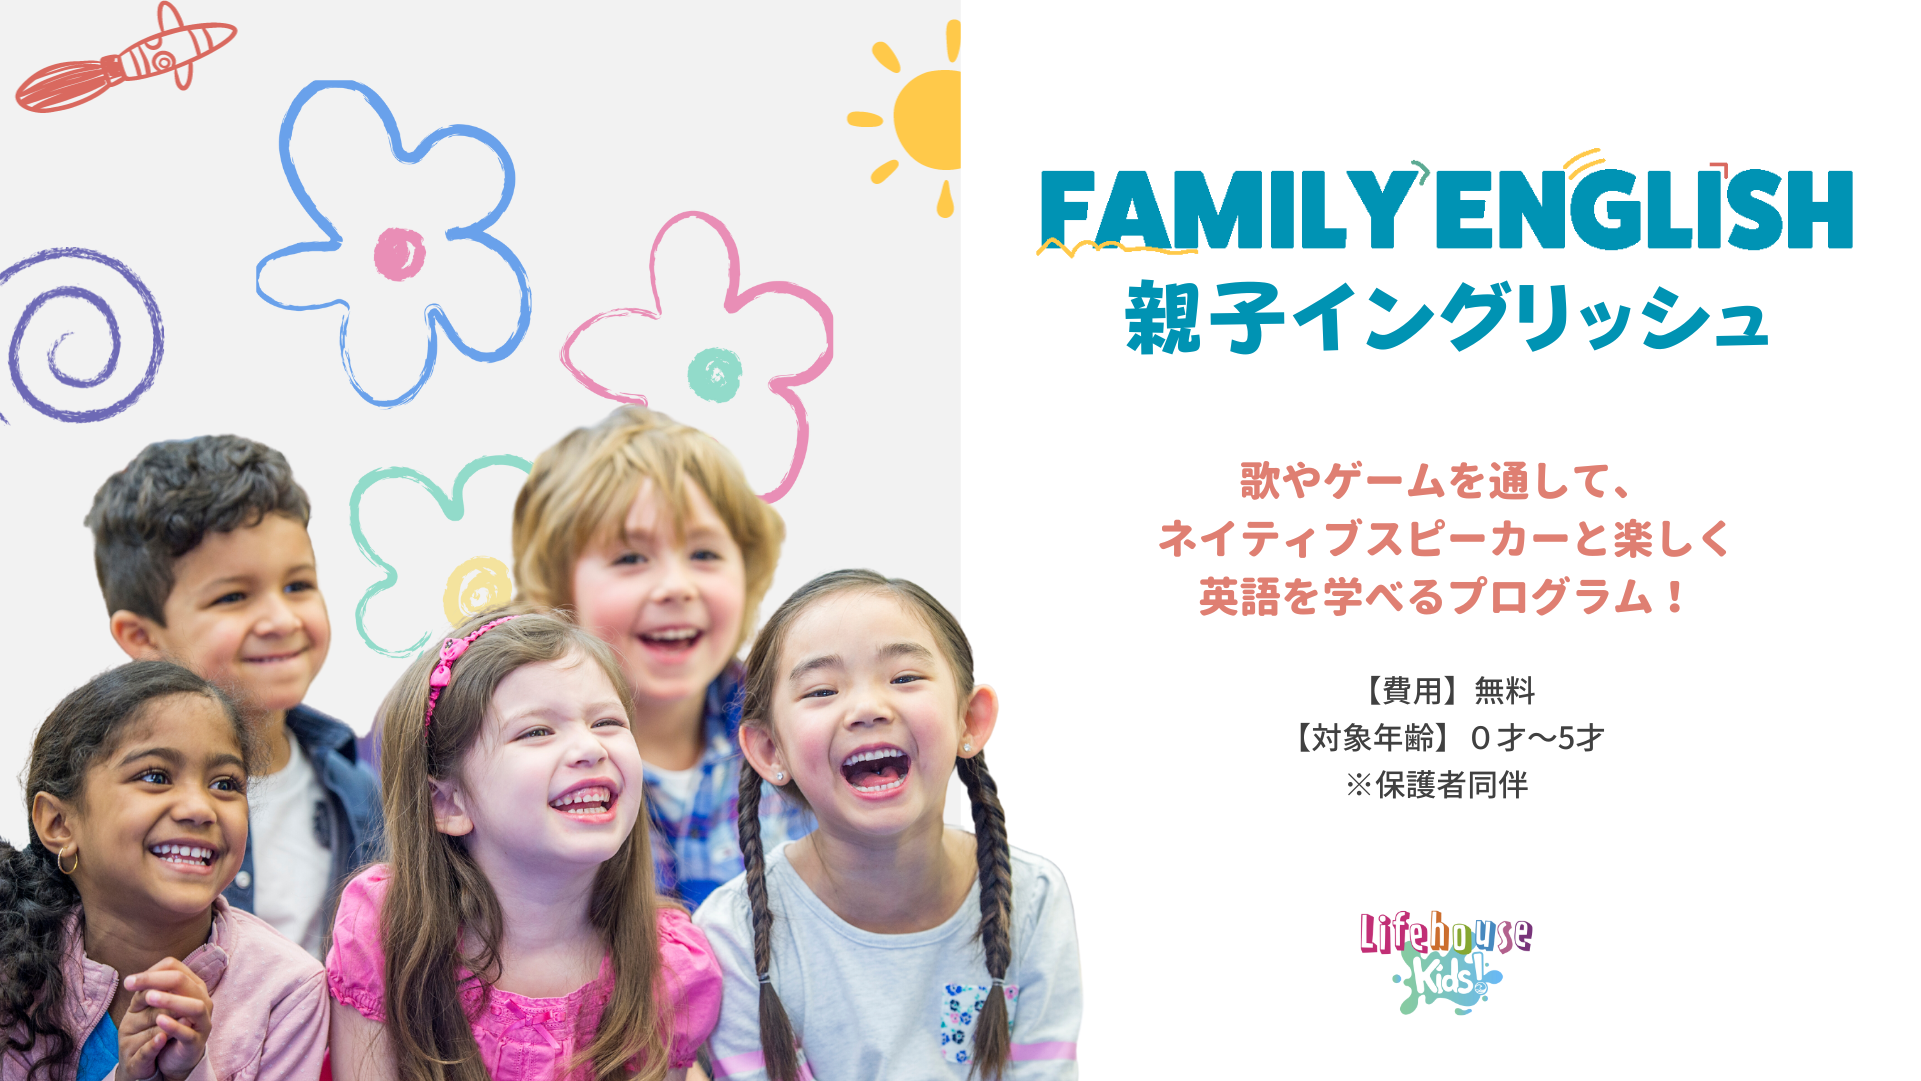 Featured image for “Family English 4/14”